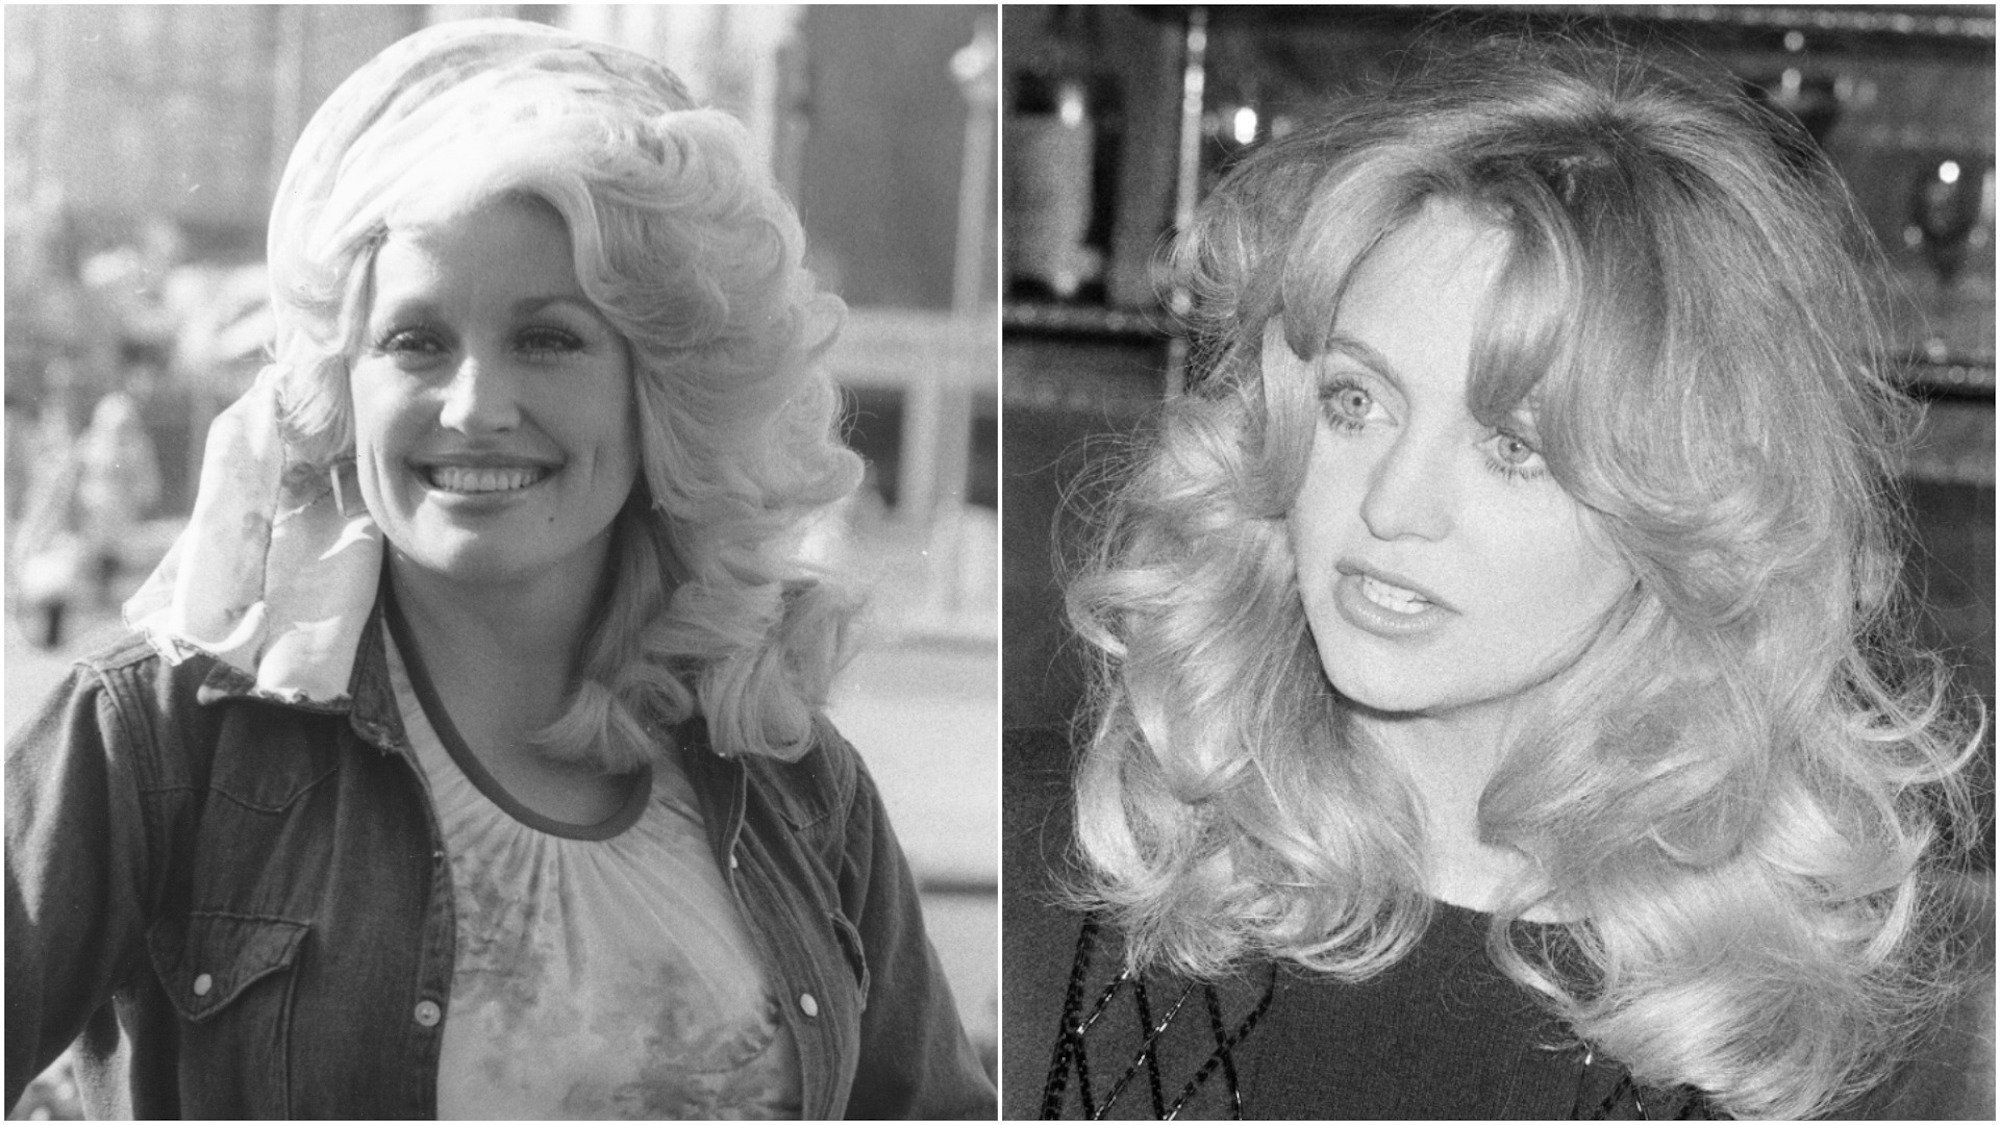 A collage image of singer Dolly Parton and actor Goldie Hawn